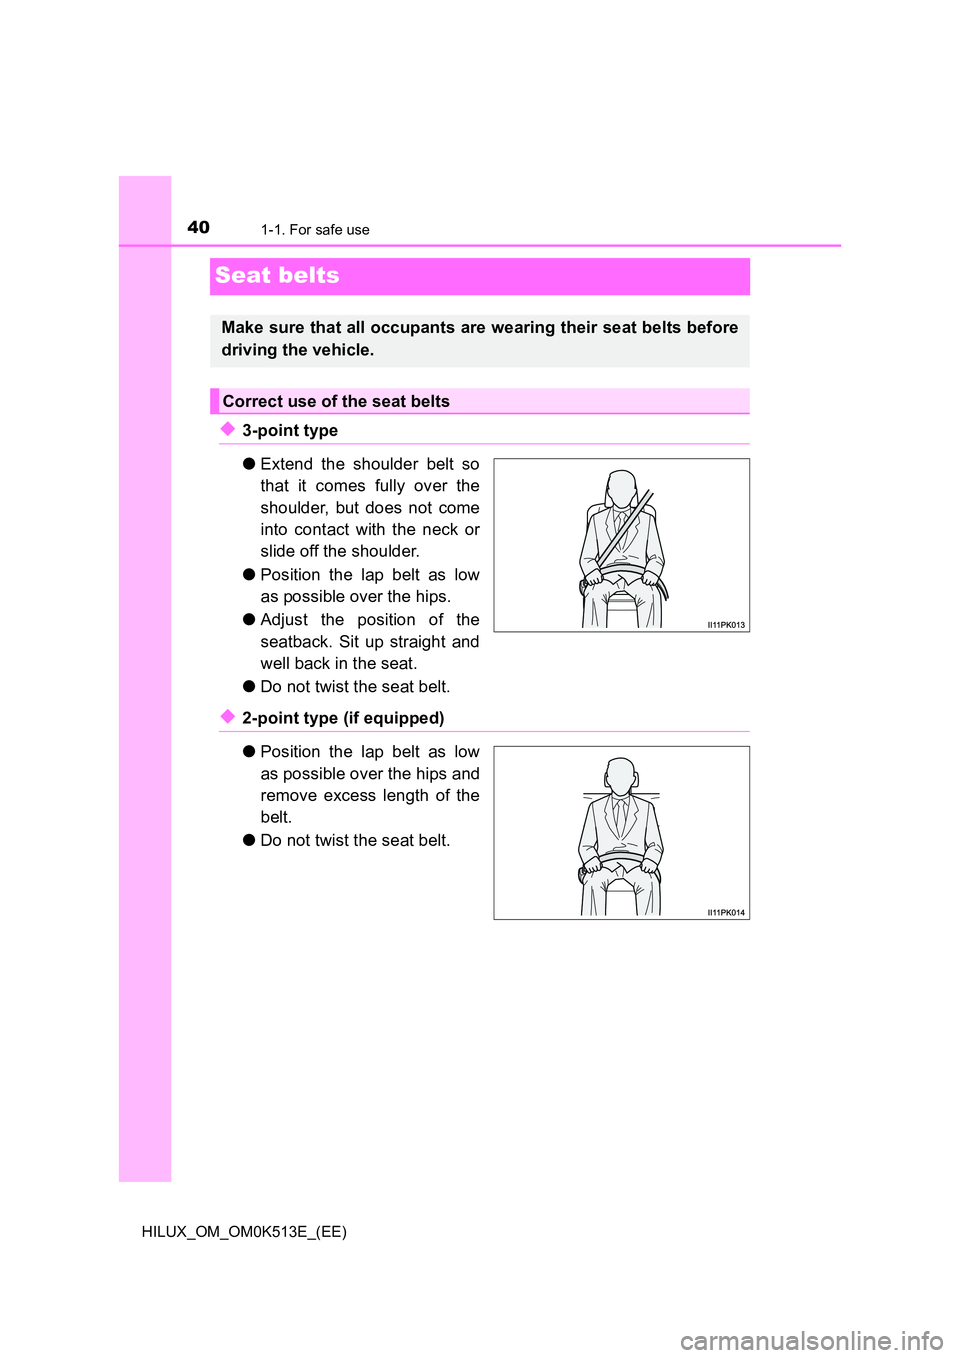 TOYOTA HILUX 2022  Owners Manual 401-1. For safe use
HILUX_OM_OM0K513E_(EE)
Seat belts
�X3-point type 
�O Extend the shoulder belt so 
that it comes fully over the 
shoulder, but does not come 
into contact with the neck or 
slide of